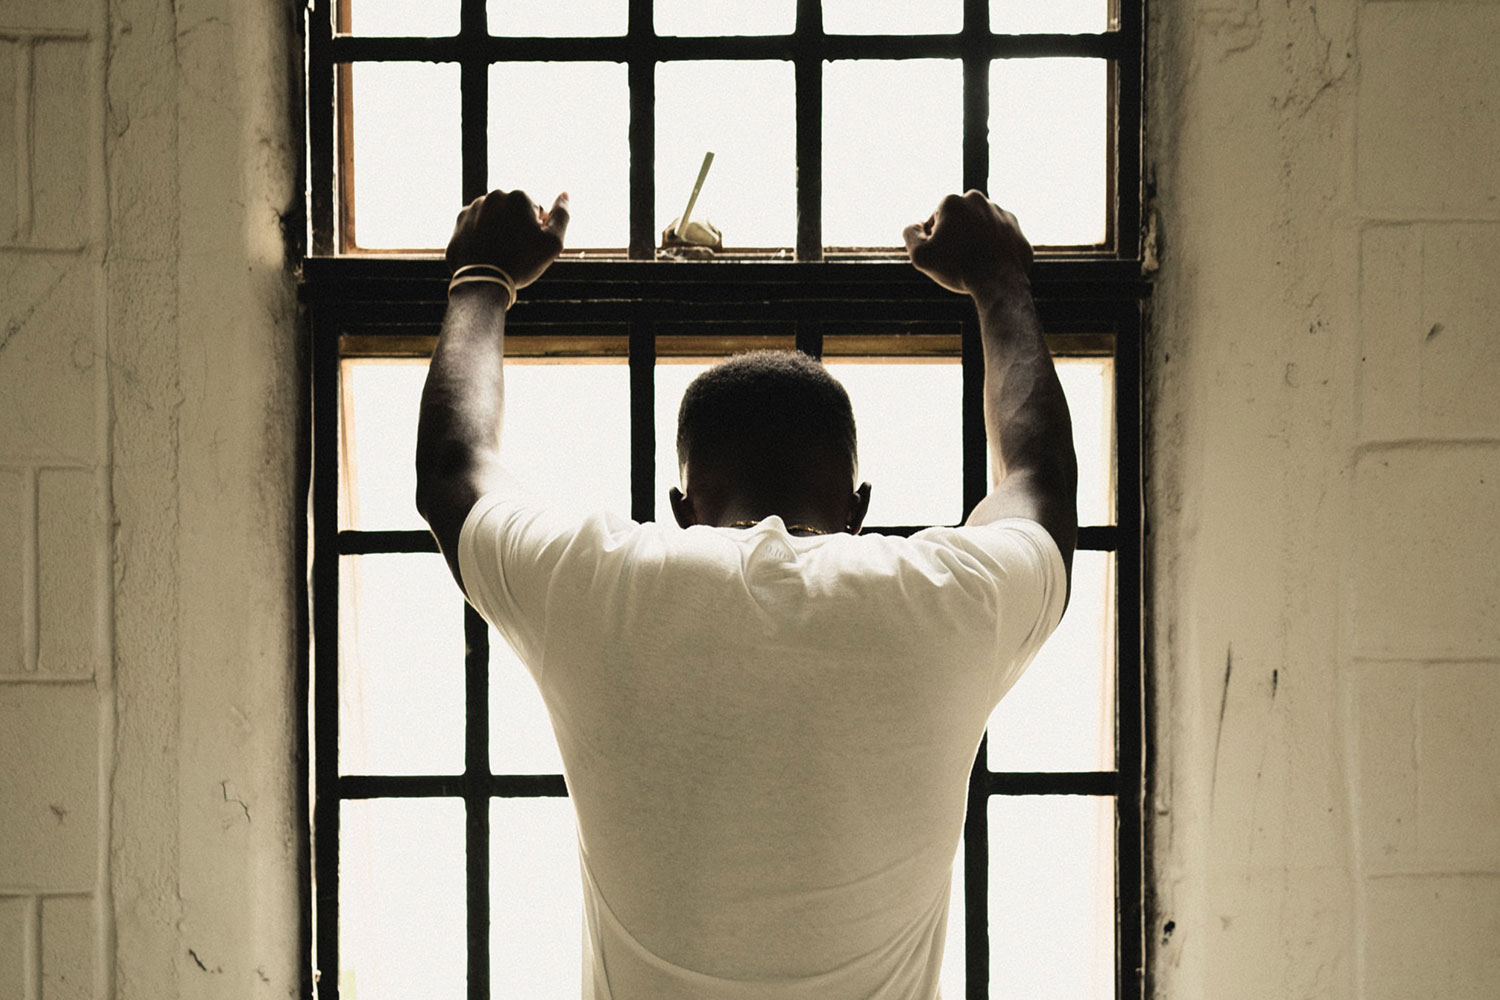 What rights do I have while incarcerated?